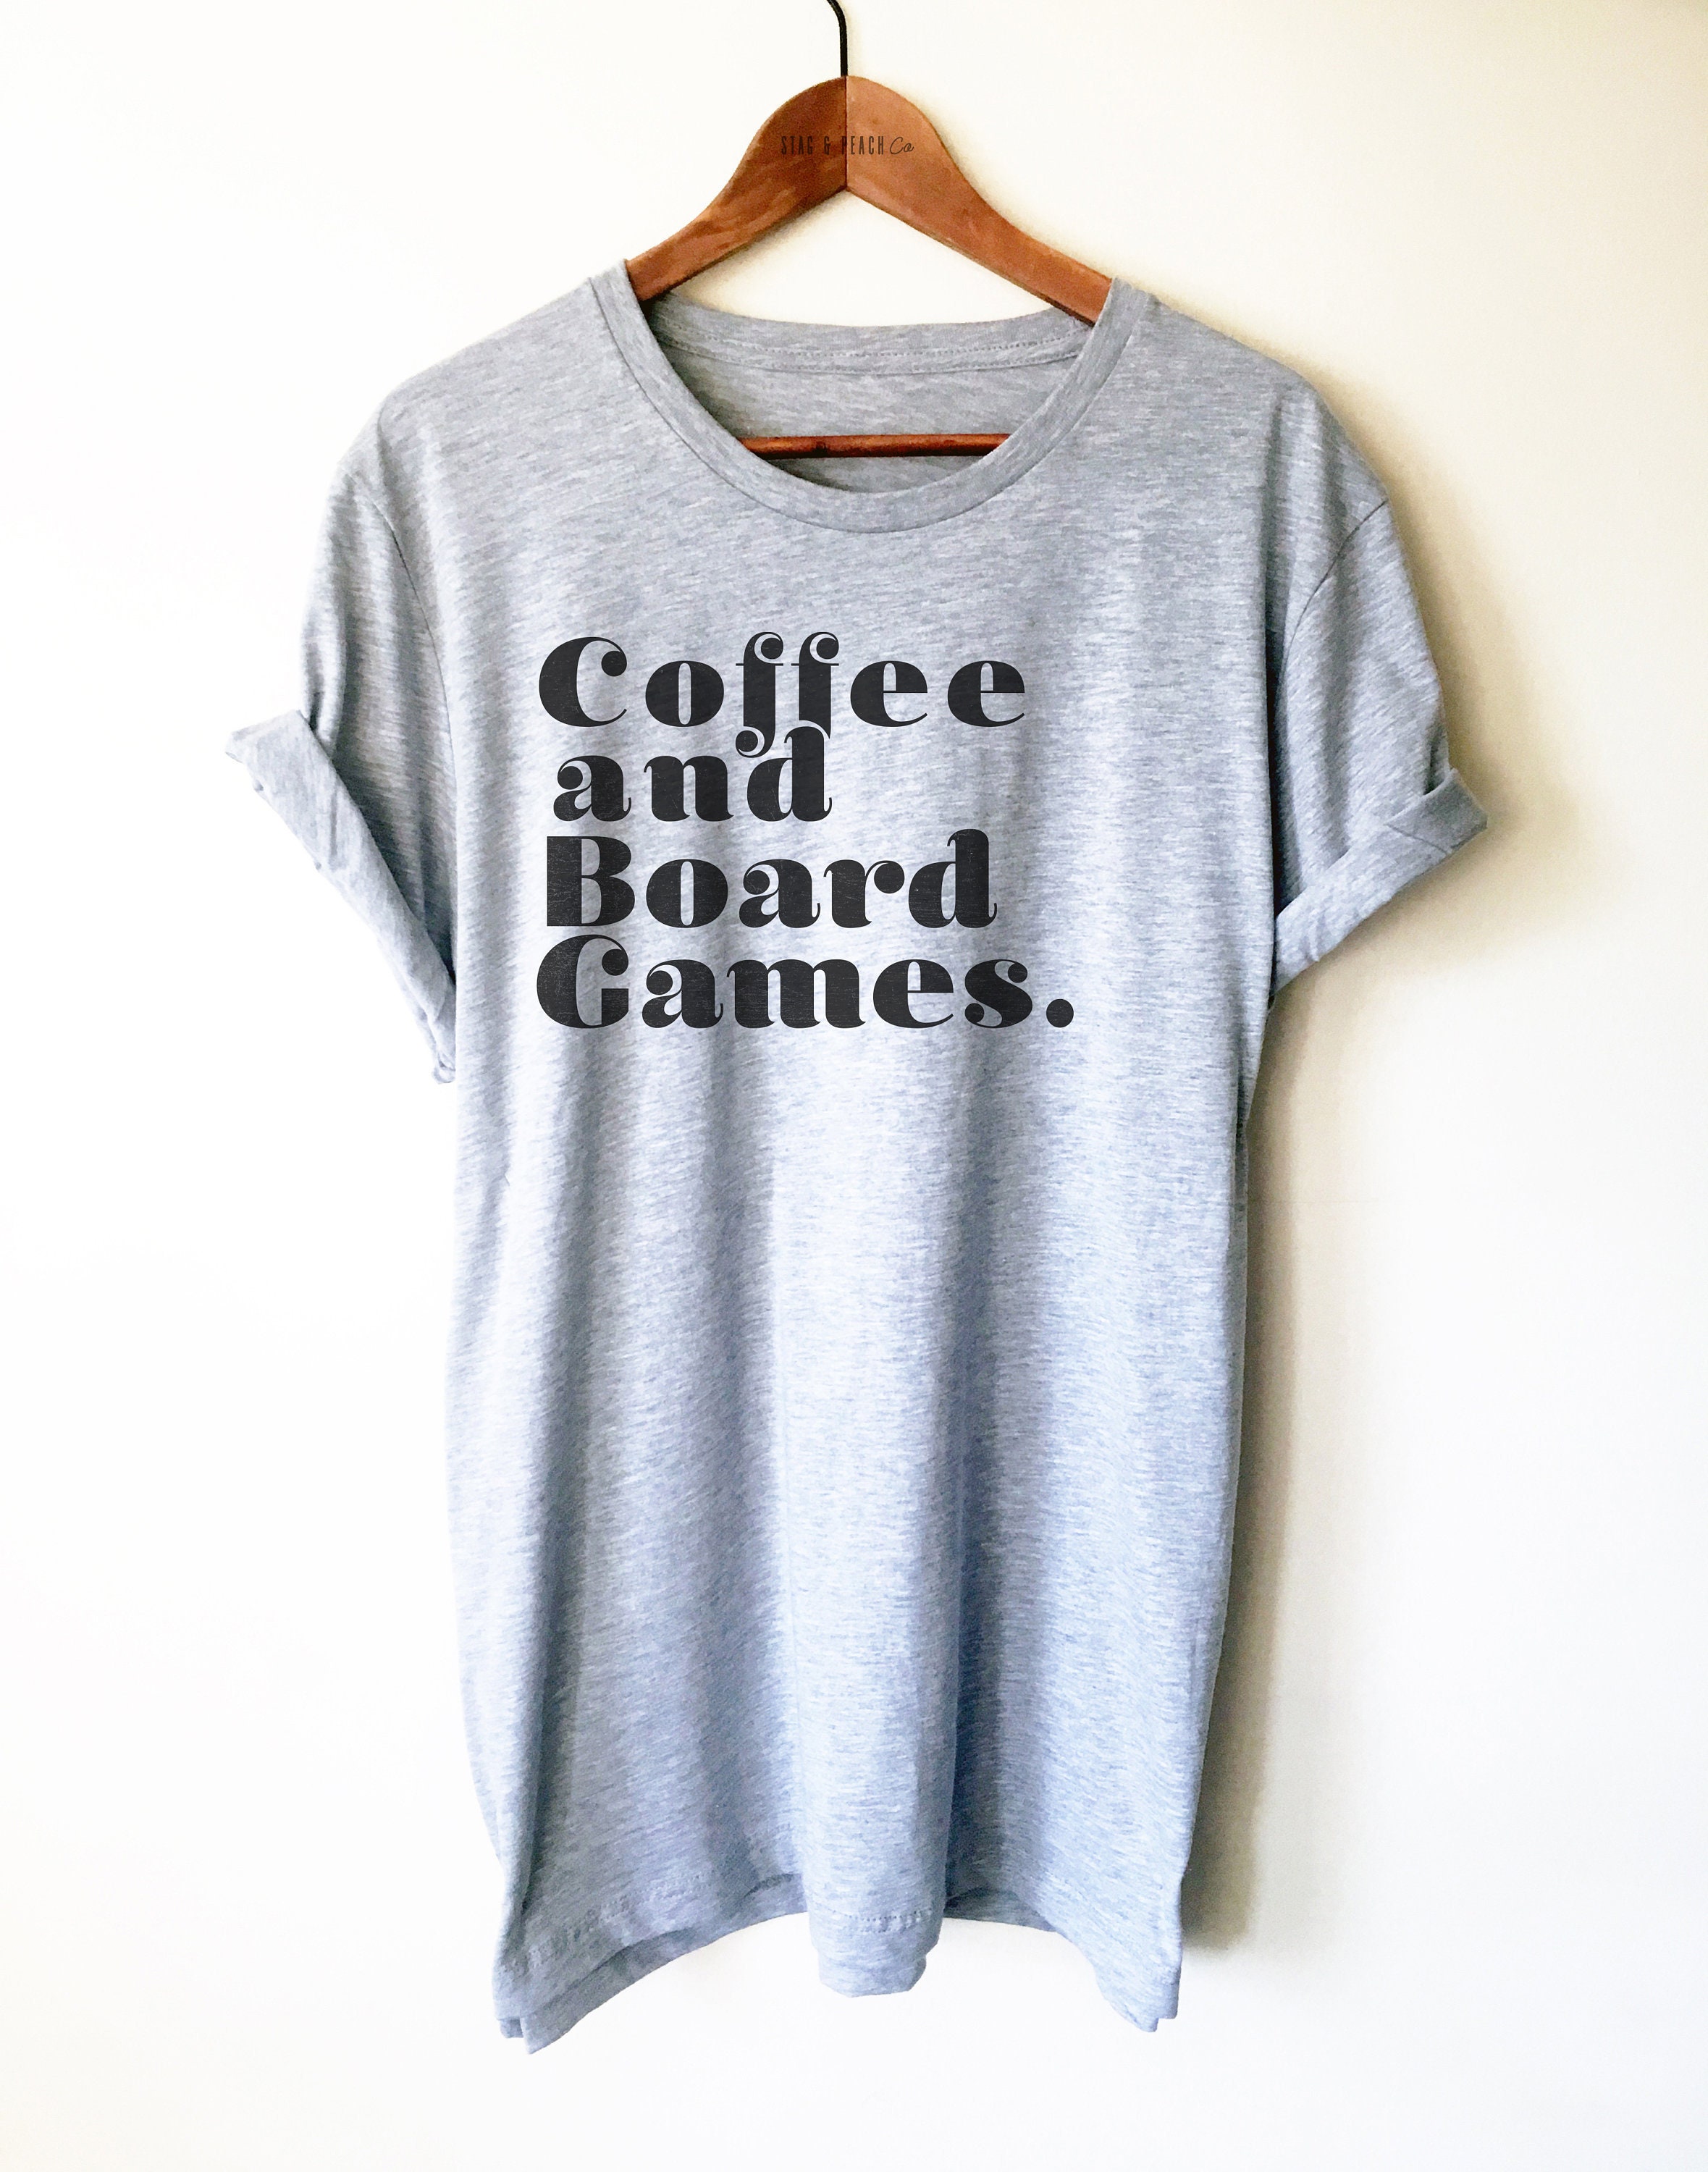 gifts tank top table top sweatshirt birthday party theme board game lovers Coffee and dominoes shirt t2570 hoodie